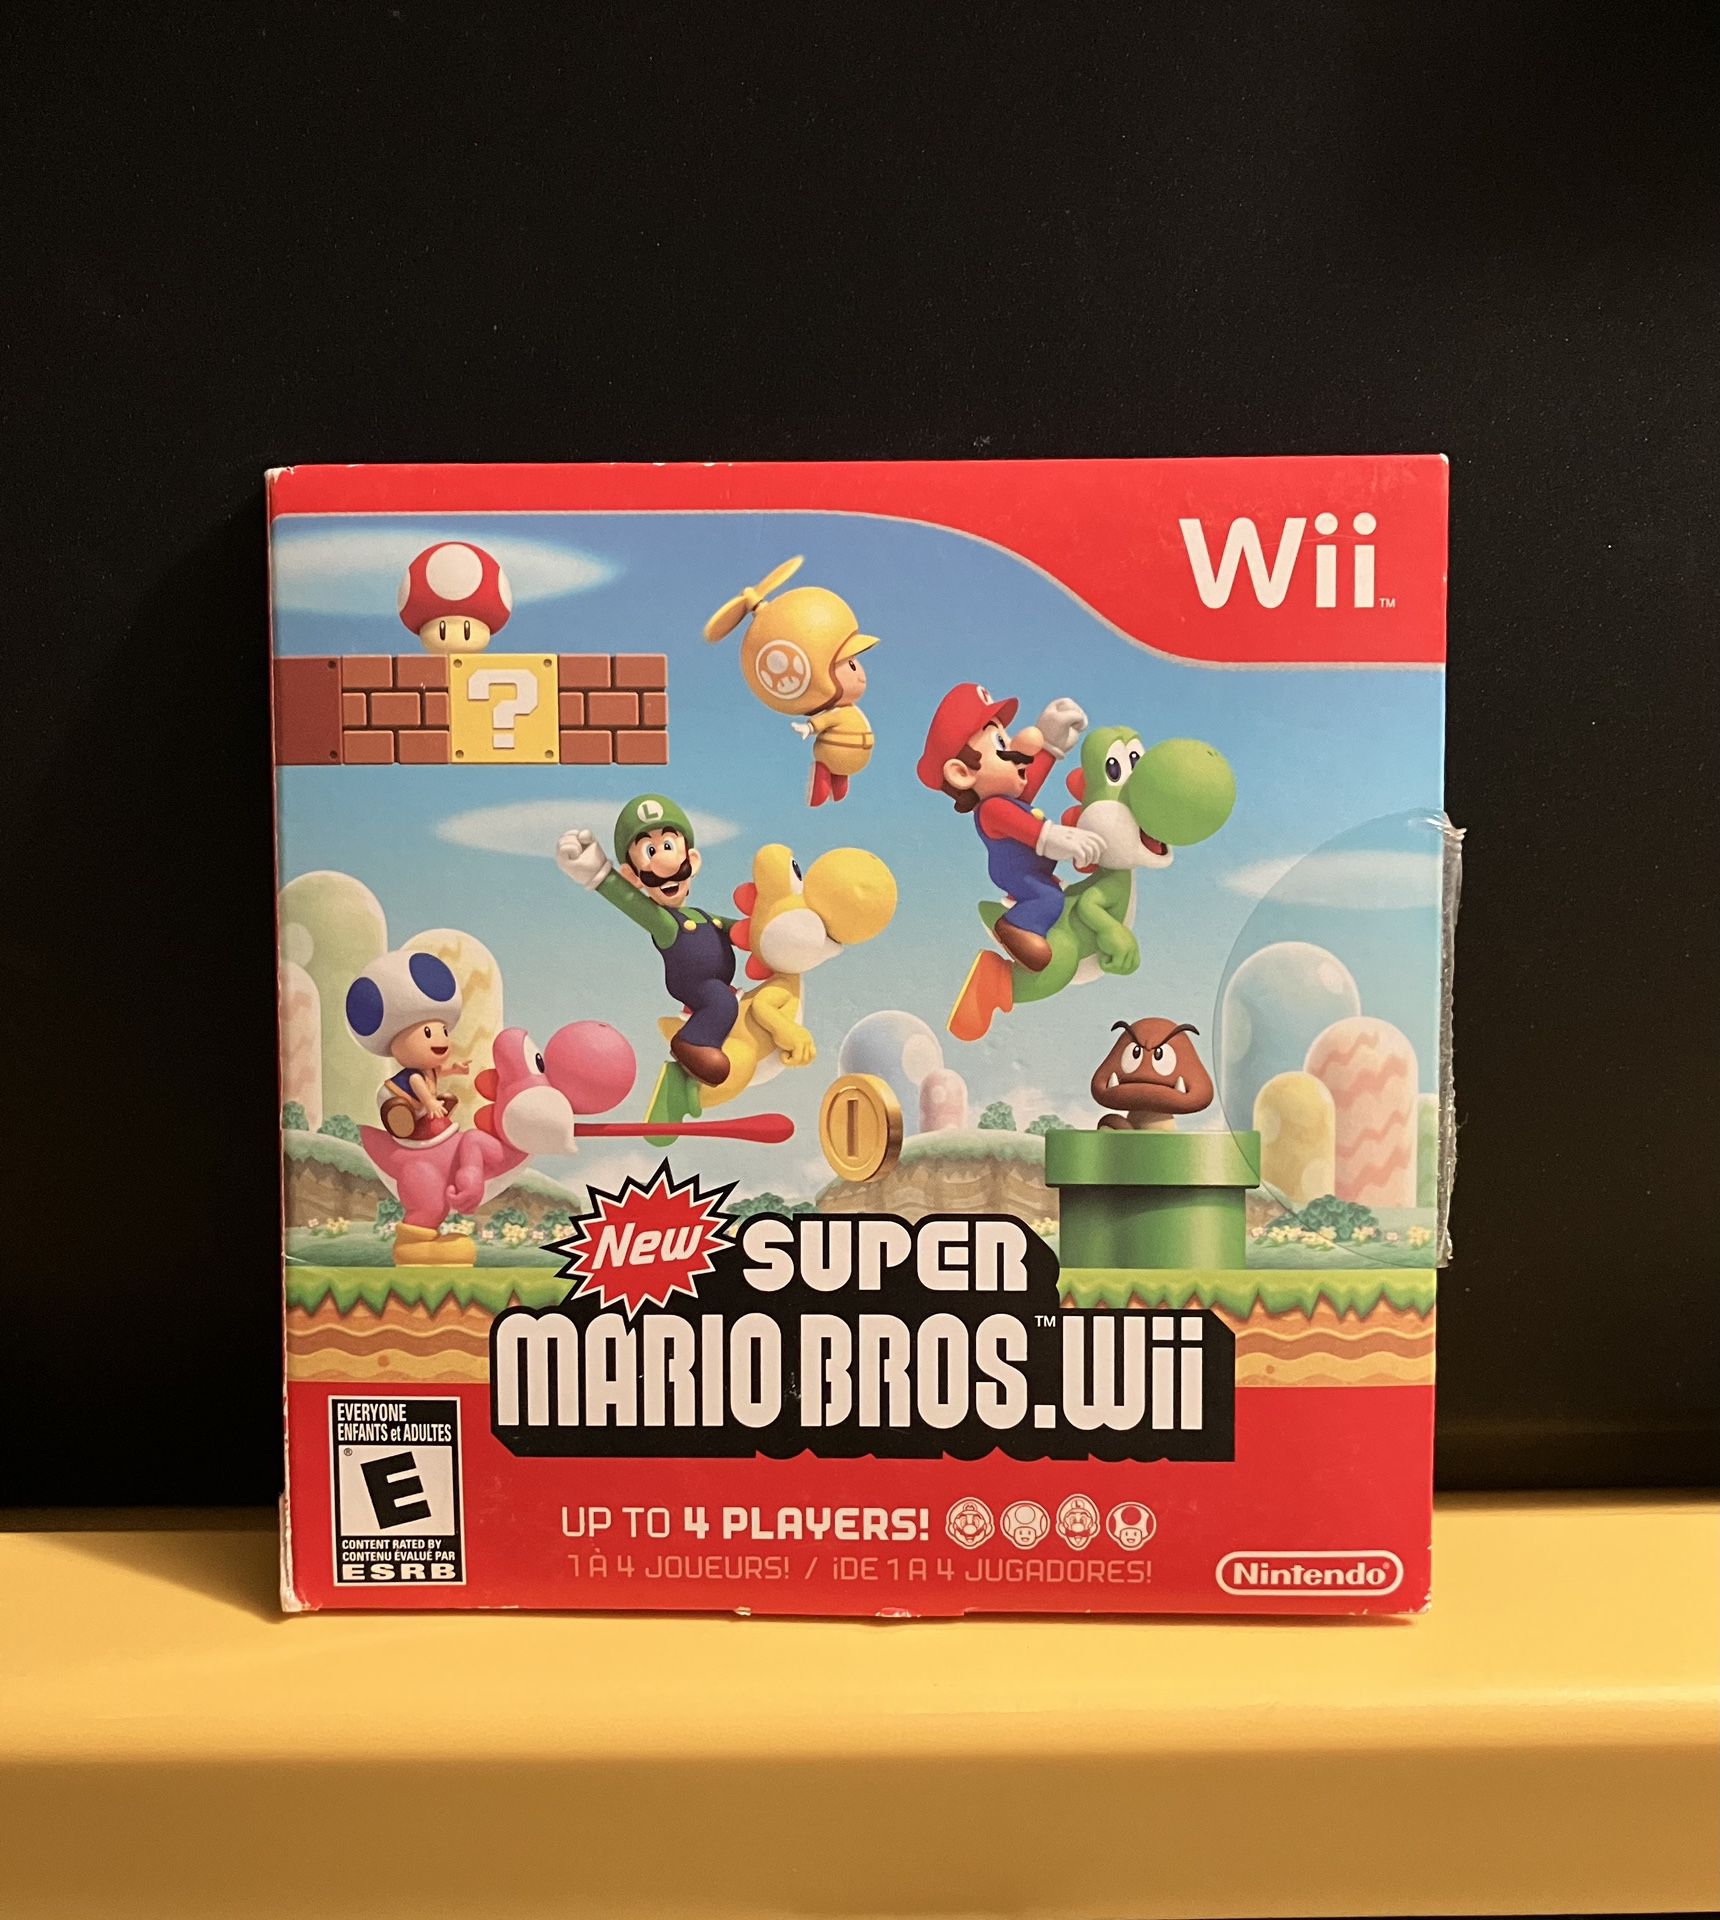 New Super Mario Bros Wii for Nintendo Wii video game console system brothers Luigi brothers